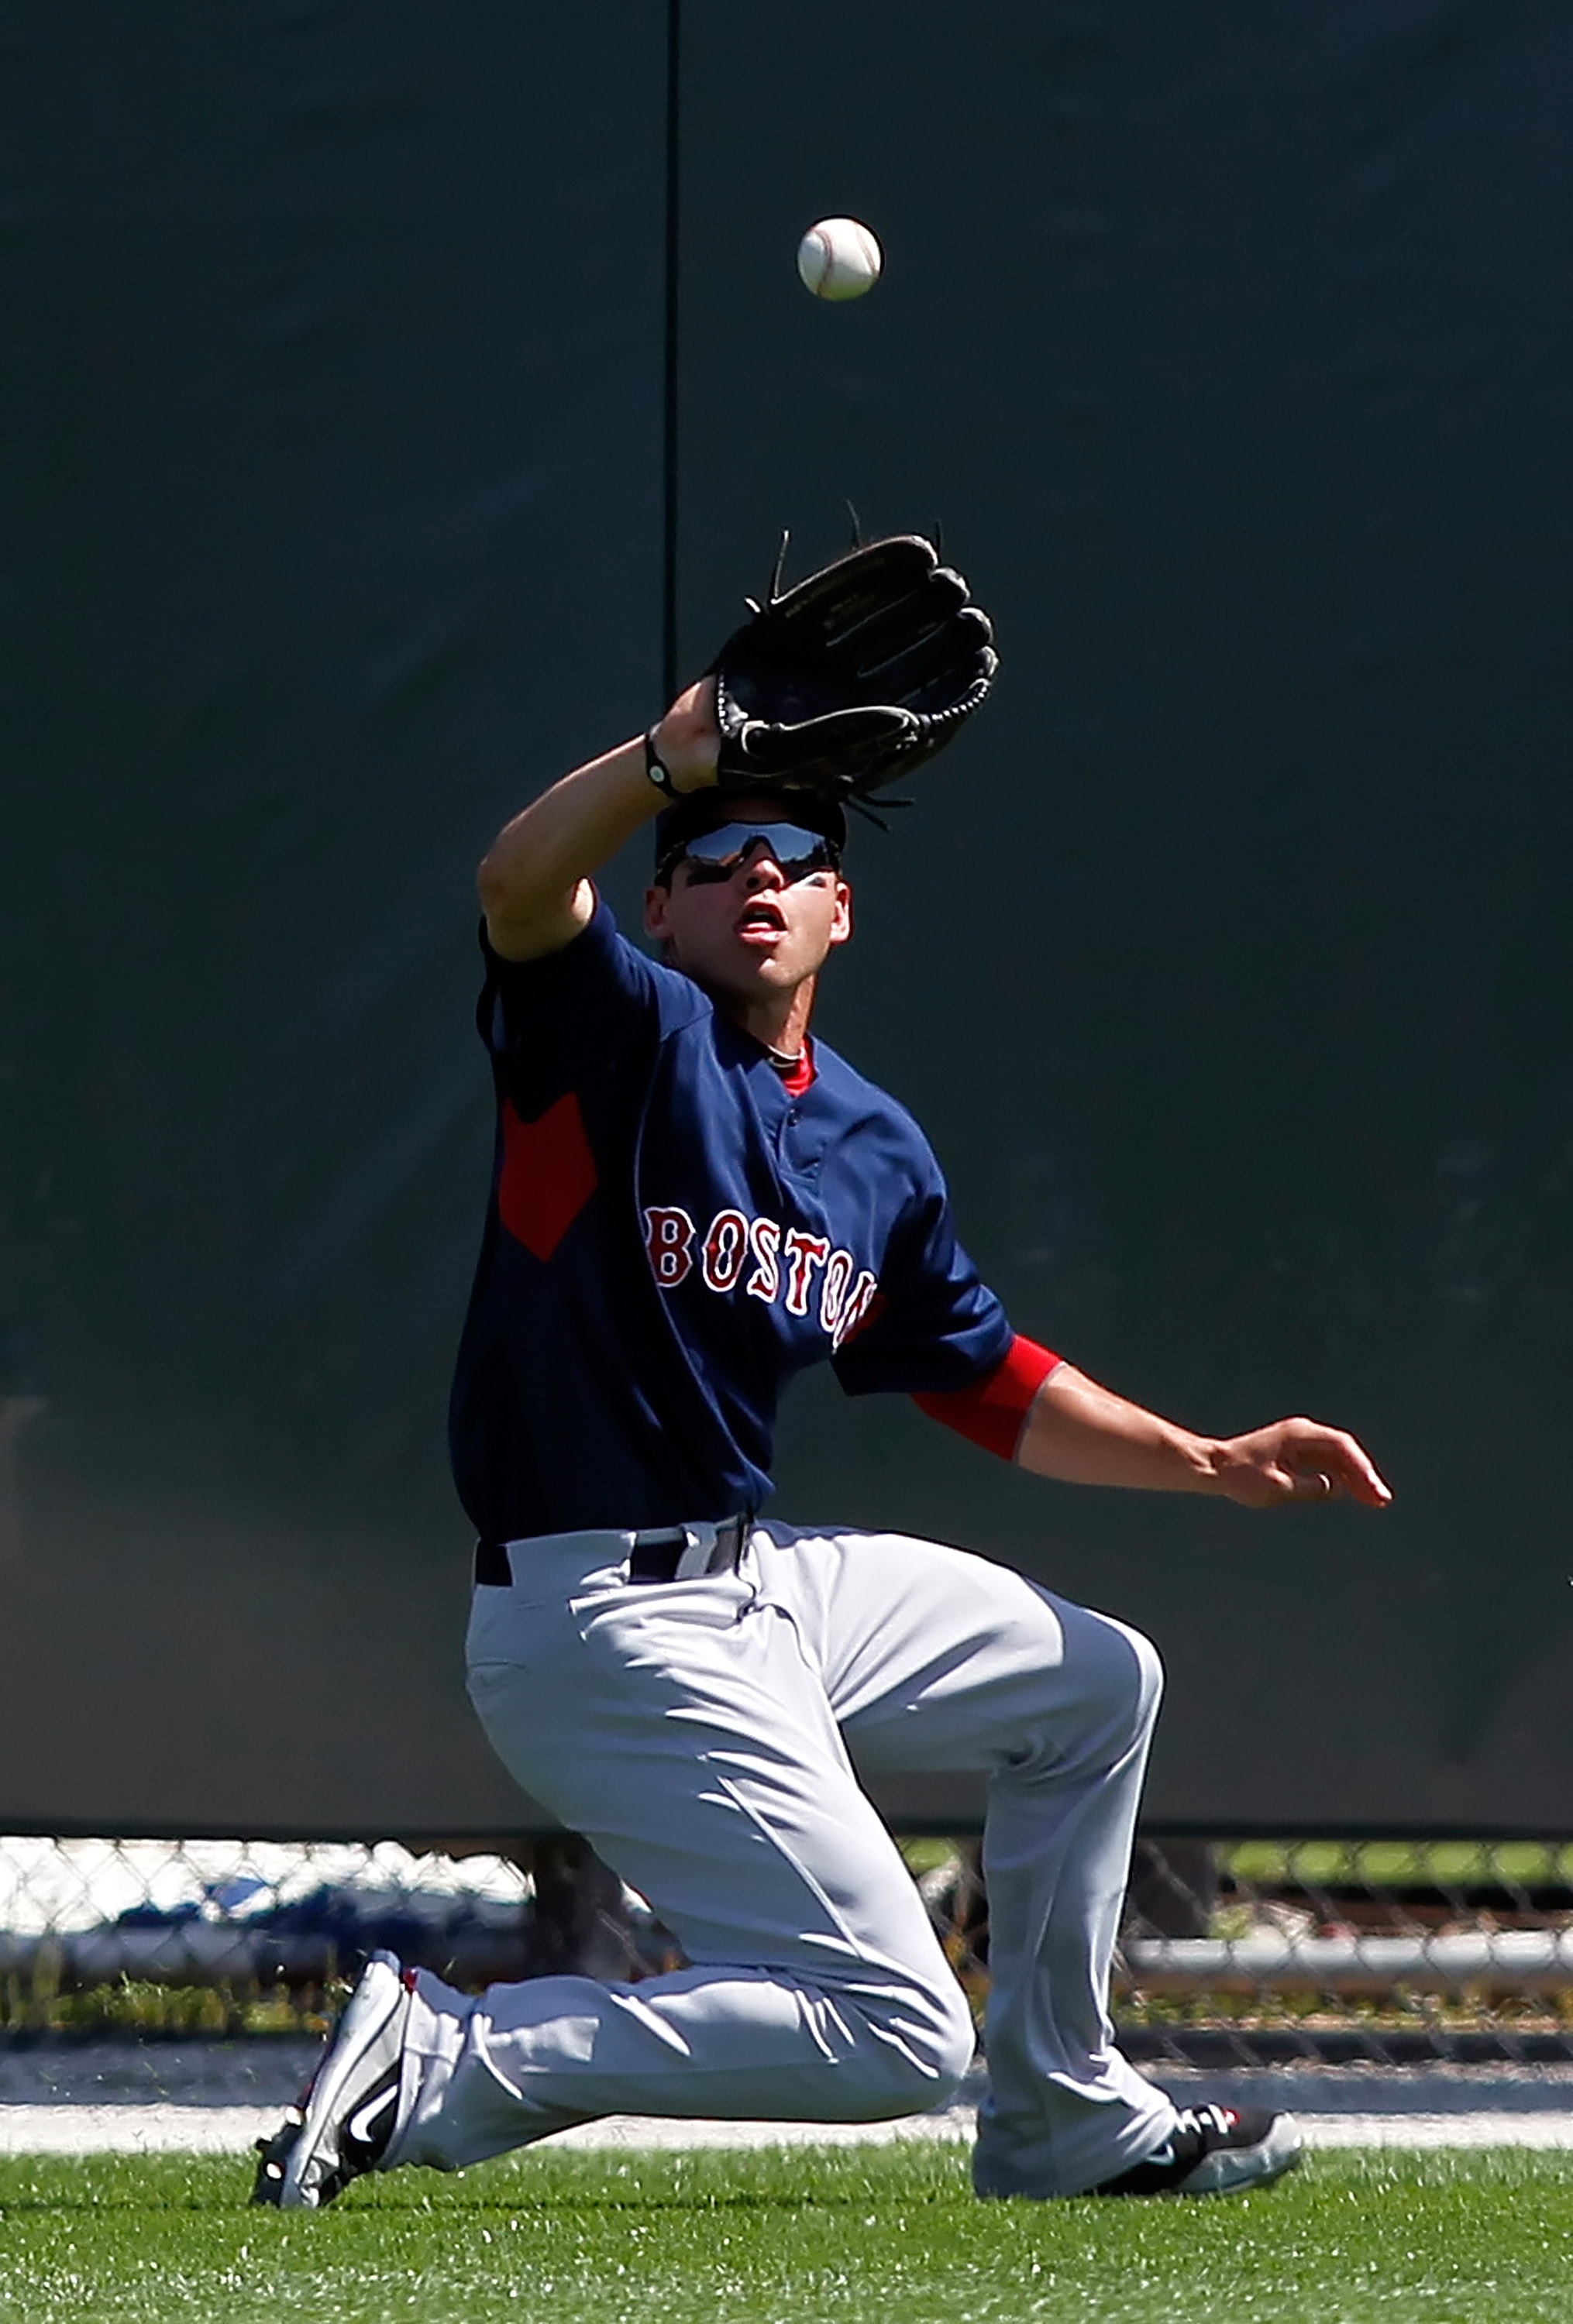 SARASOTA, FL - MARCH 27:  Outfielder Jacoby Ellsbury #2 of the Boston Red Sox  catches a fly ball against the Baltimore Orioles during a Grapefruit League Spring Training Game at Ed Smith Stadium on March 27, 2010 in Sarasota, Florida.  (Photo by J. Meric